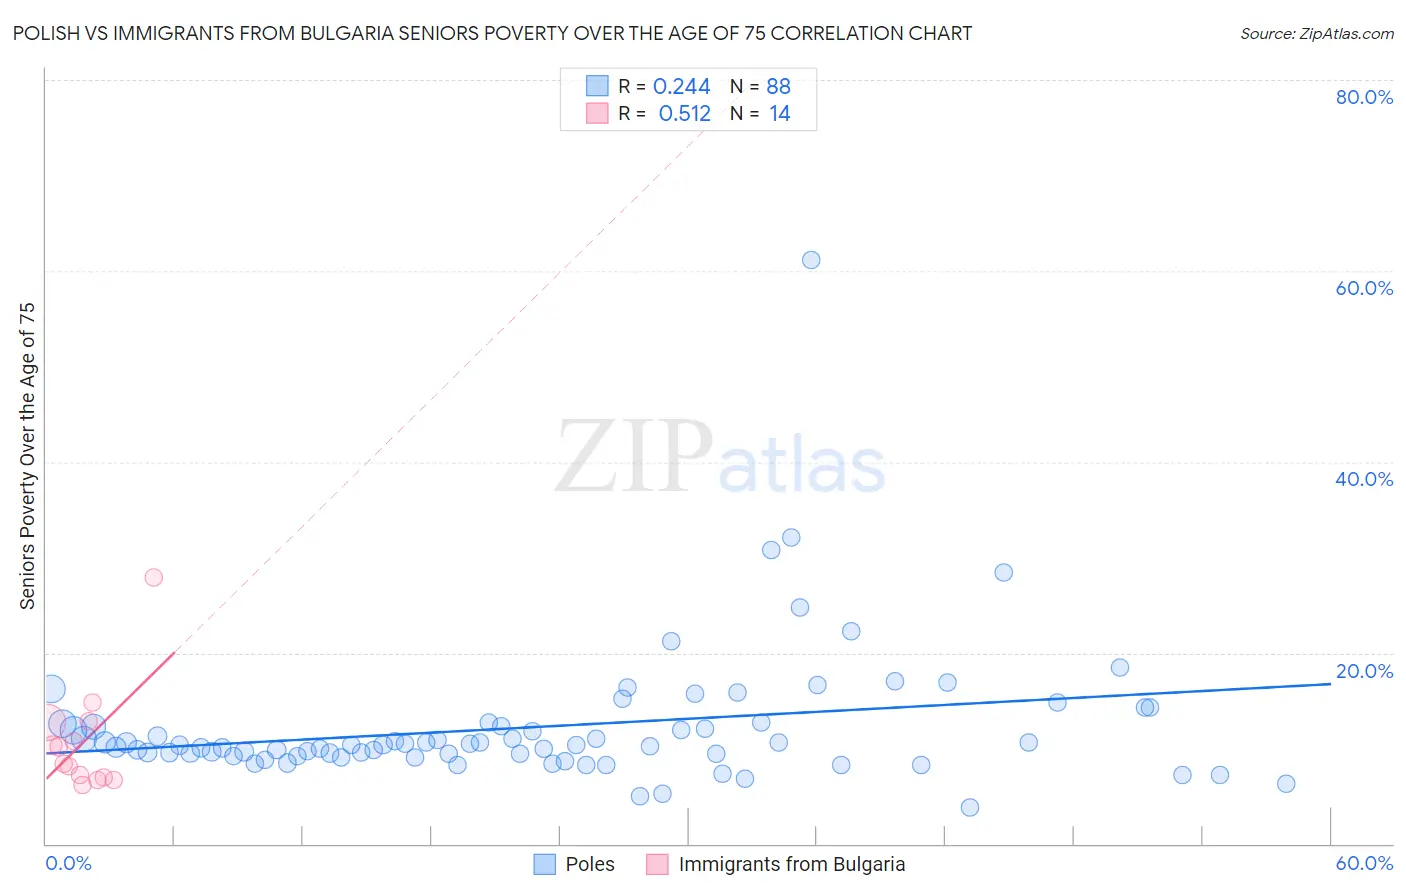 Polish vs Immigrants from Bulgaria Seniors Poverty Over the Age of 75